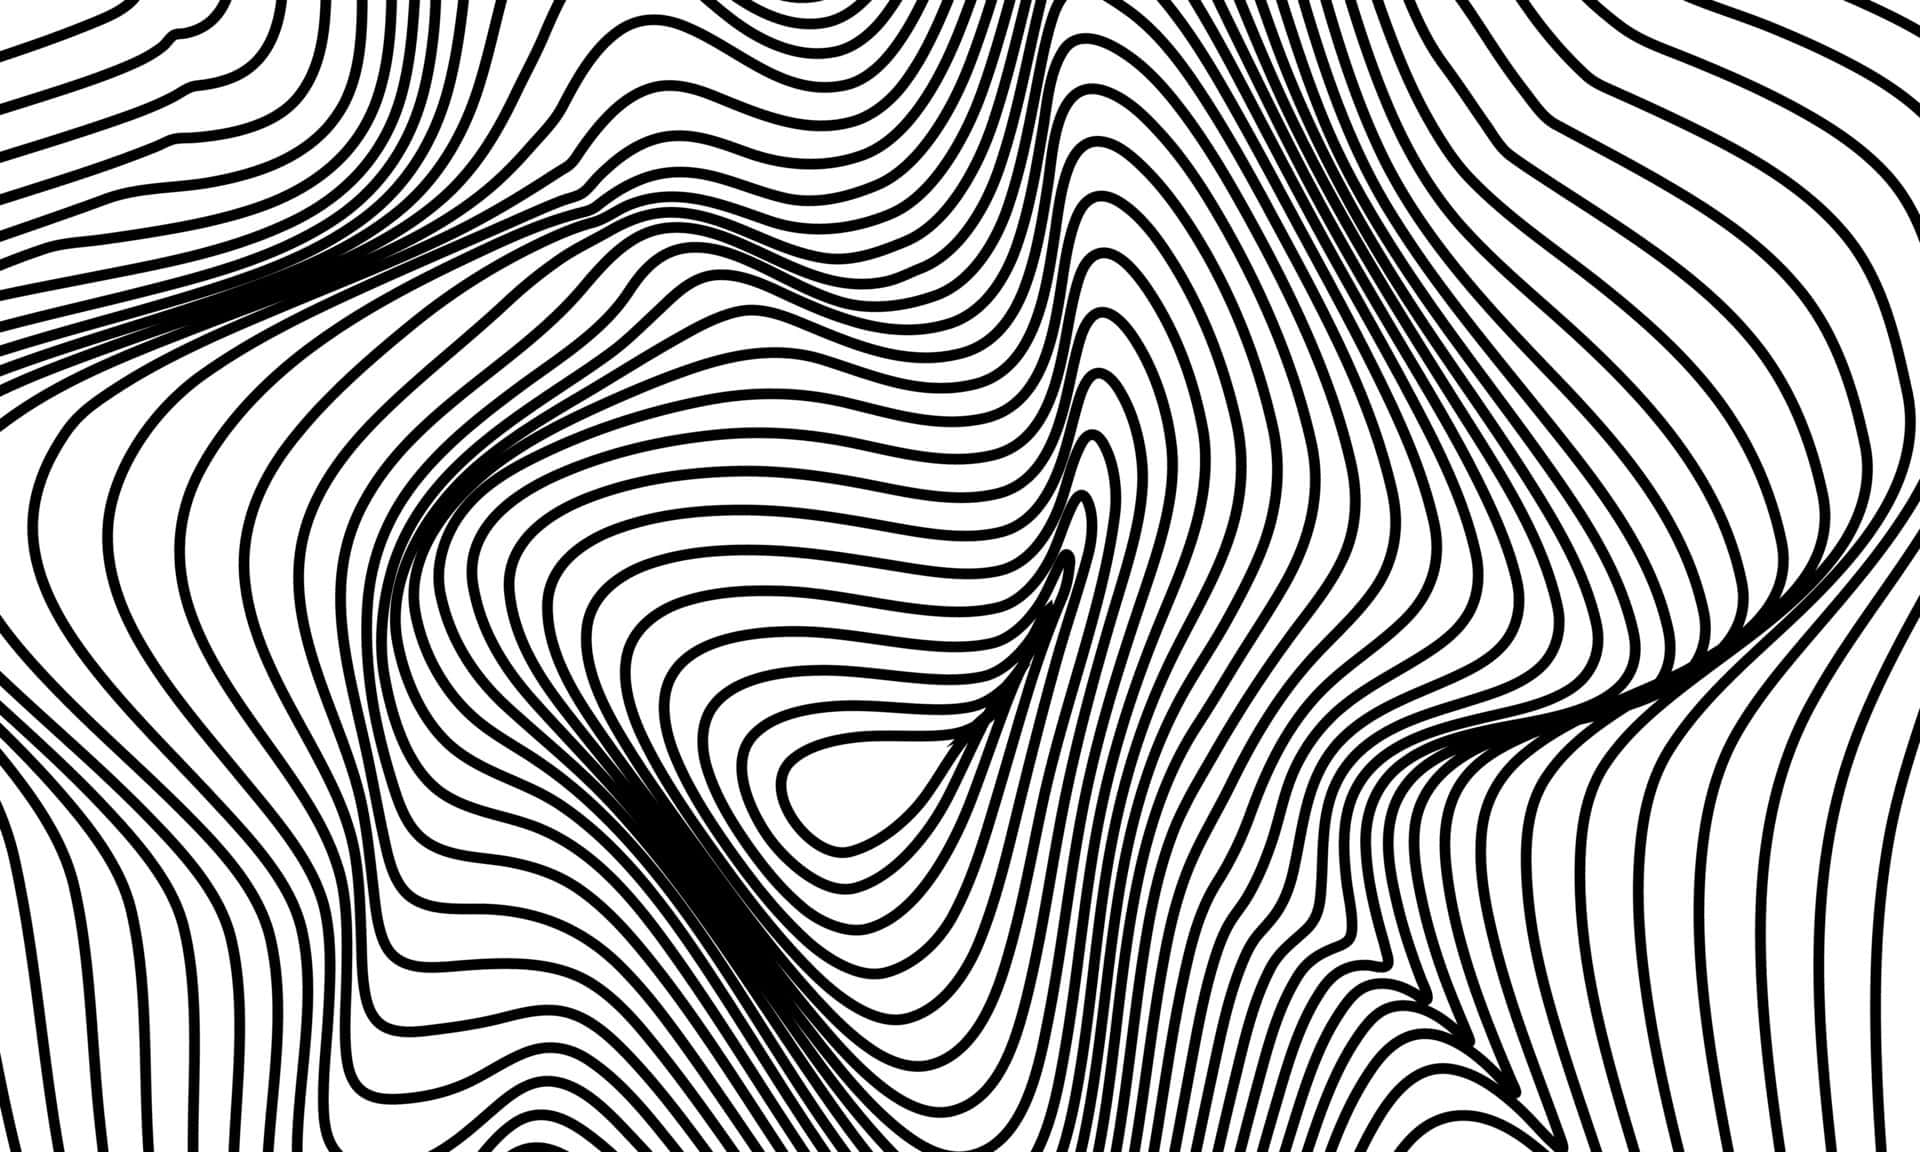 A Black And White Abstract Pattern With Lines